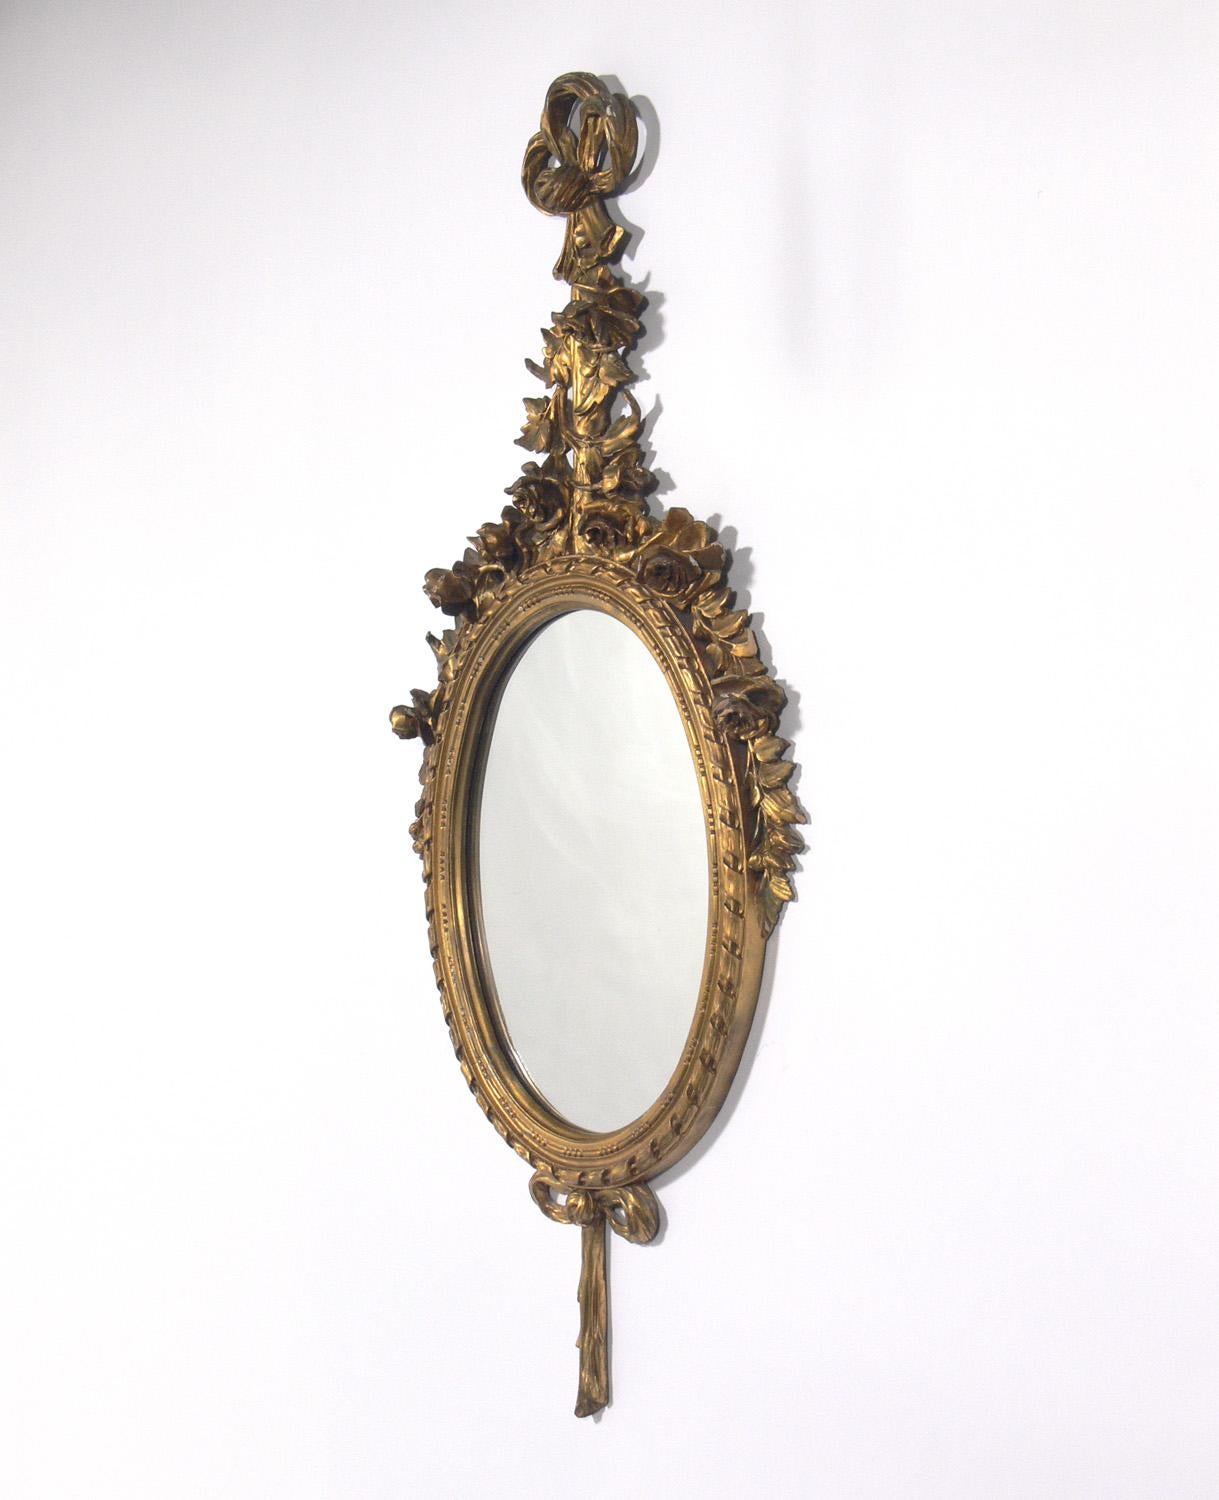 Pair of gilt oval mirrors, probably French, circa 1940s, possibly earlier. They retain their warm original patina to both the giltwood frames and the original mirrored glass.